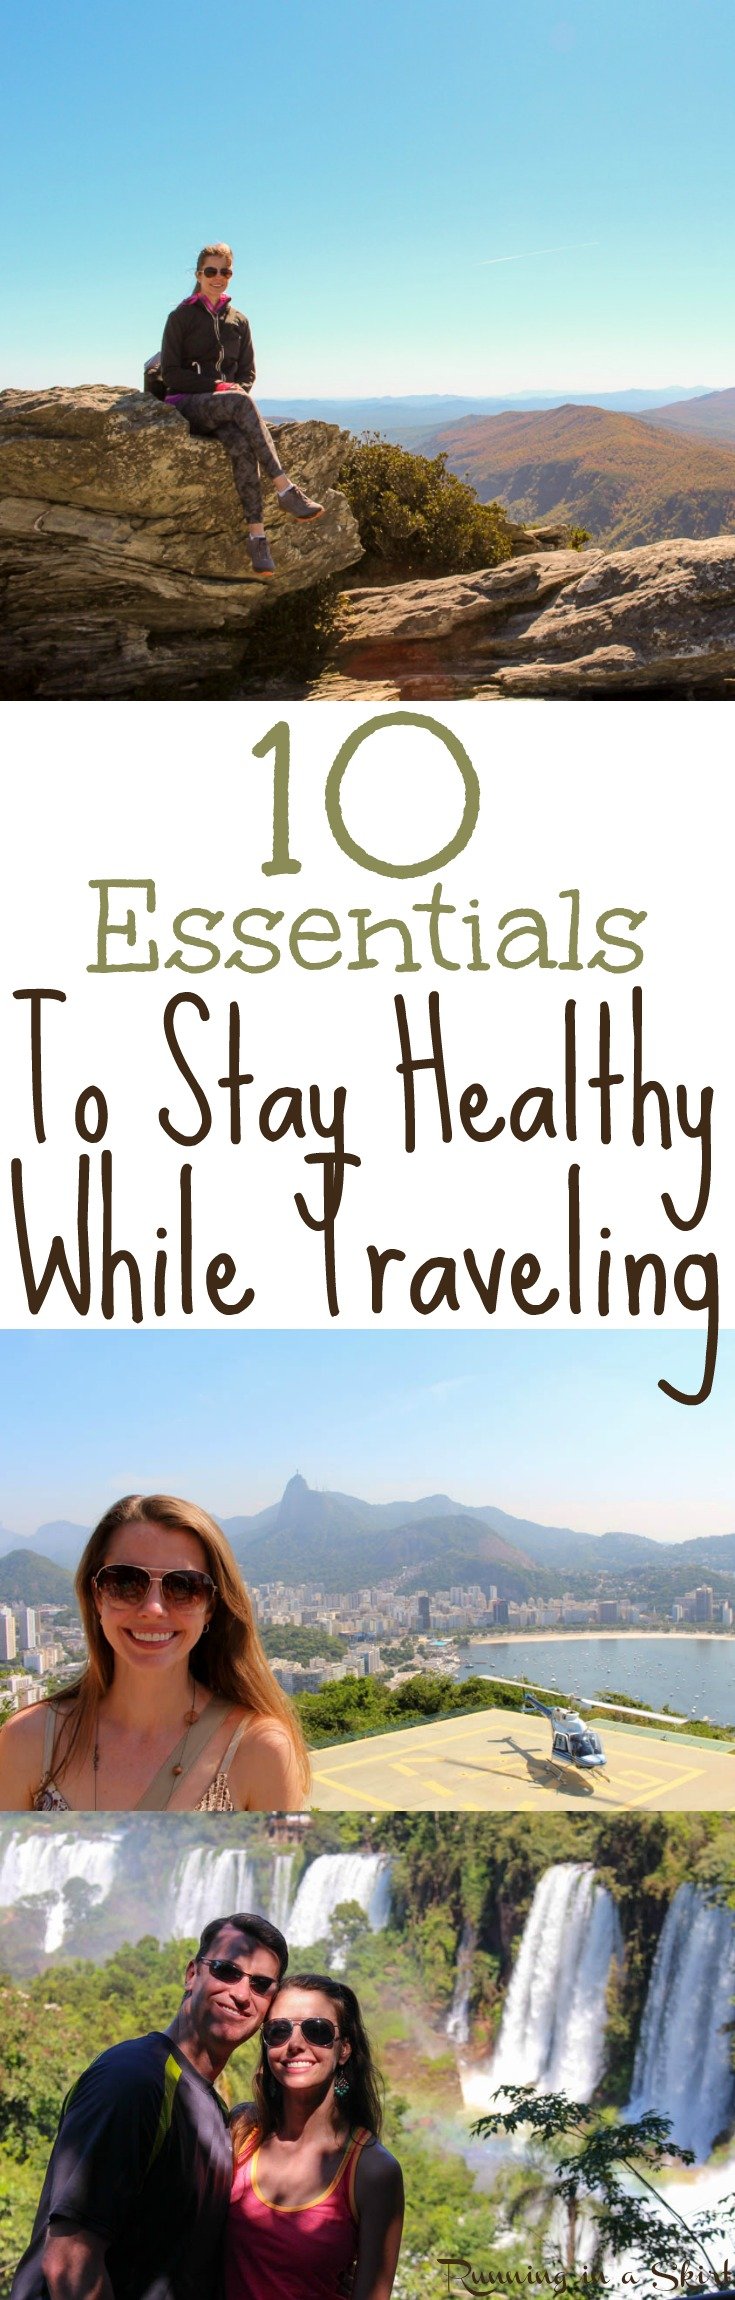 10 Tips for Healthy Travel - Essentials to Stay Healthy While Traveling/ Running in a Skirt